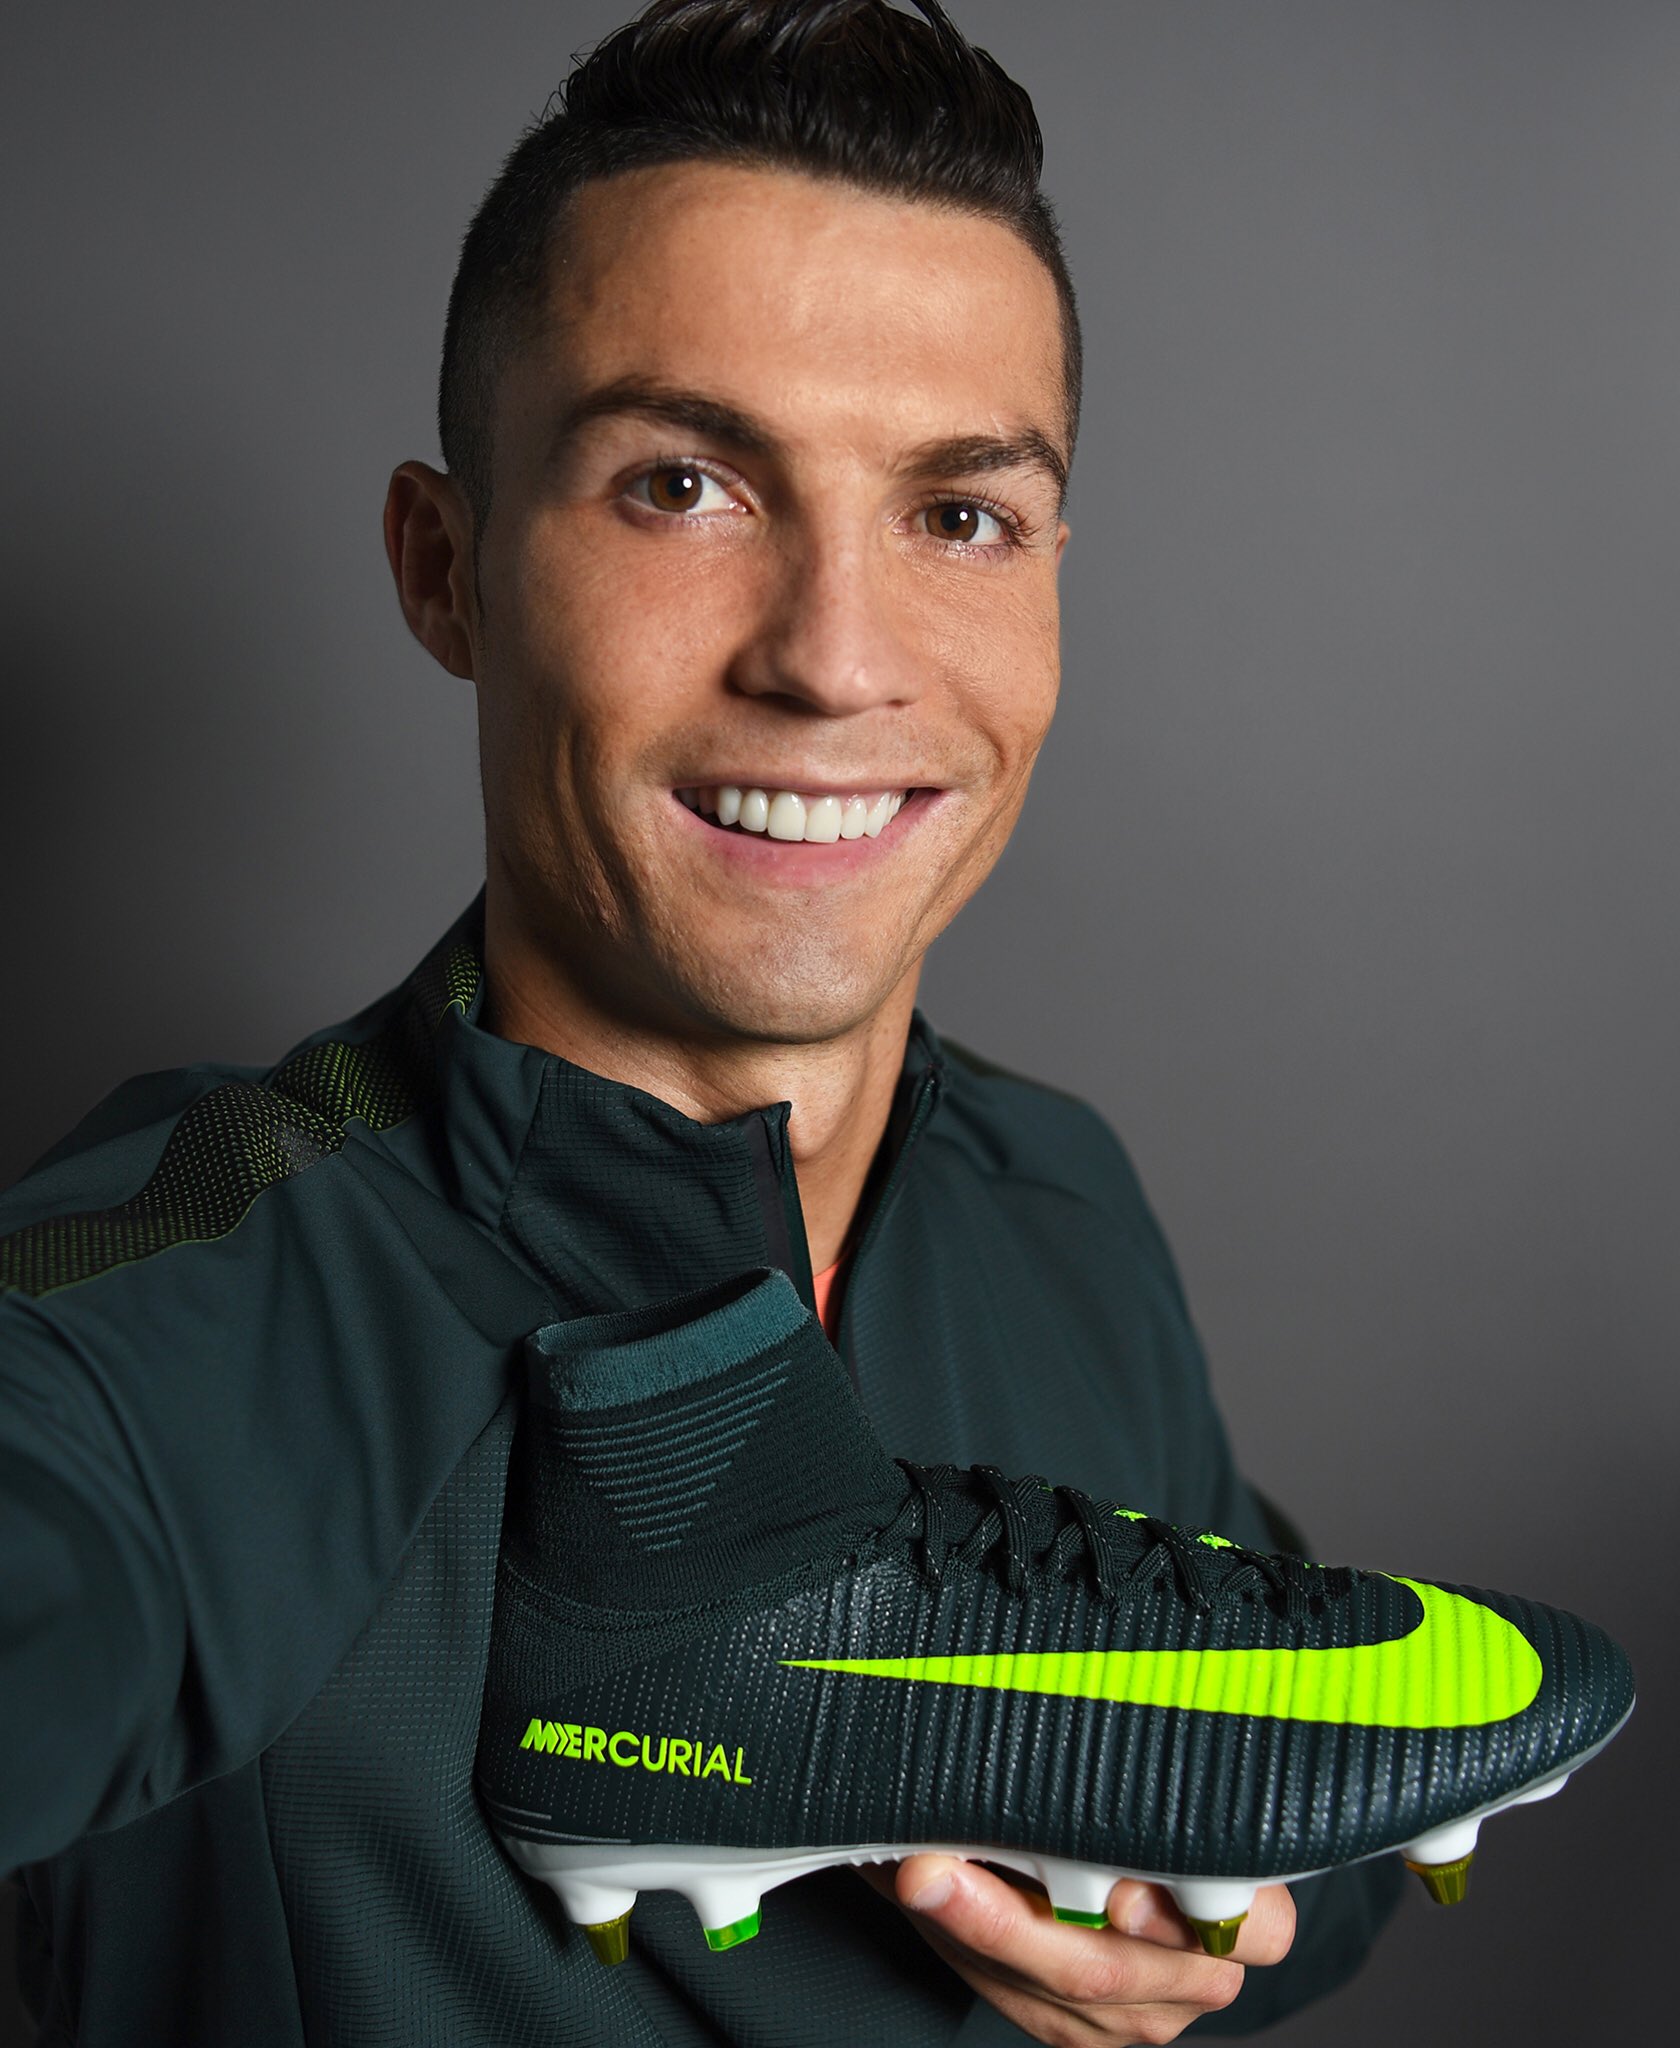 Ronaldo on Twitter: "😍 Love my new #Mercurial 🔎CR7 Chapter3: Discovery 🔍 👀👉🏼 https://t.co/E2zLOUFGP6 / Twitter